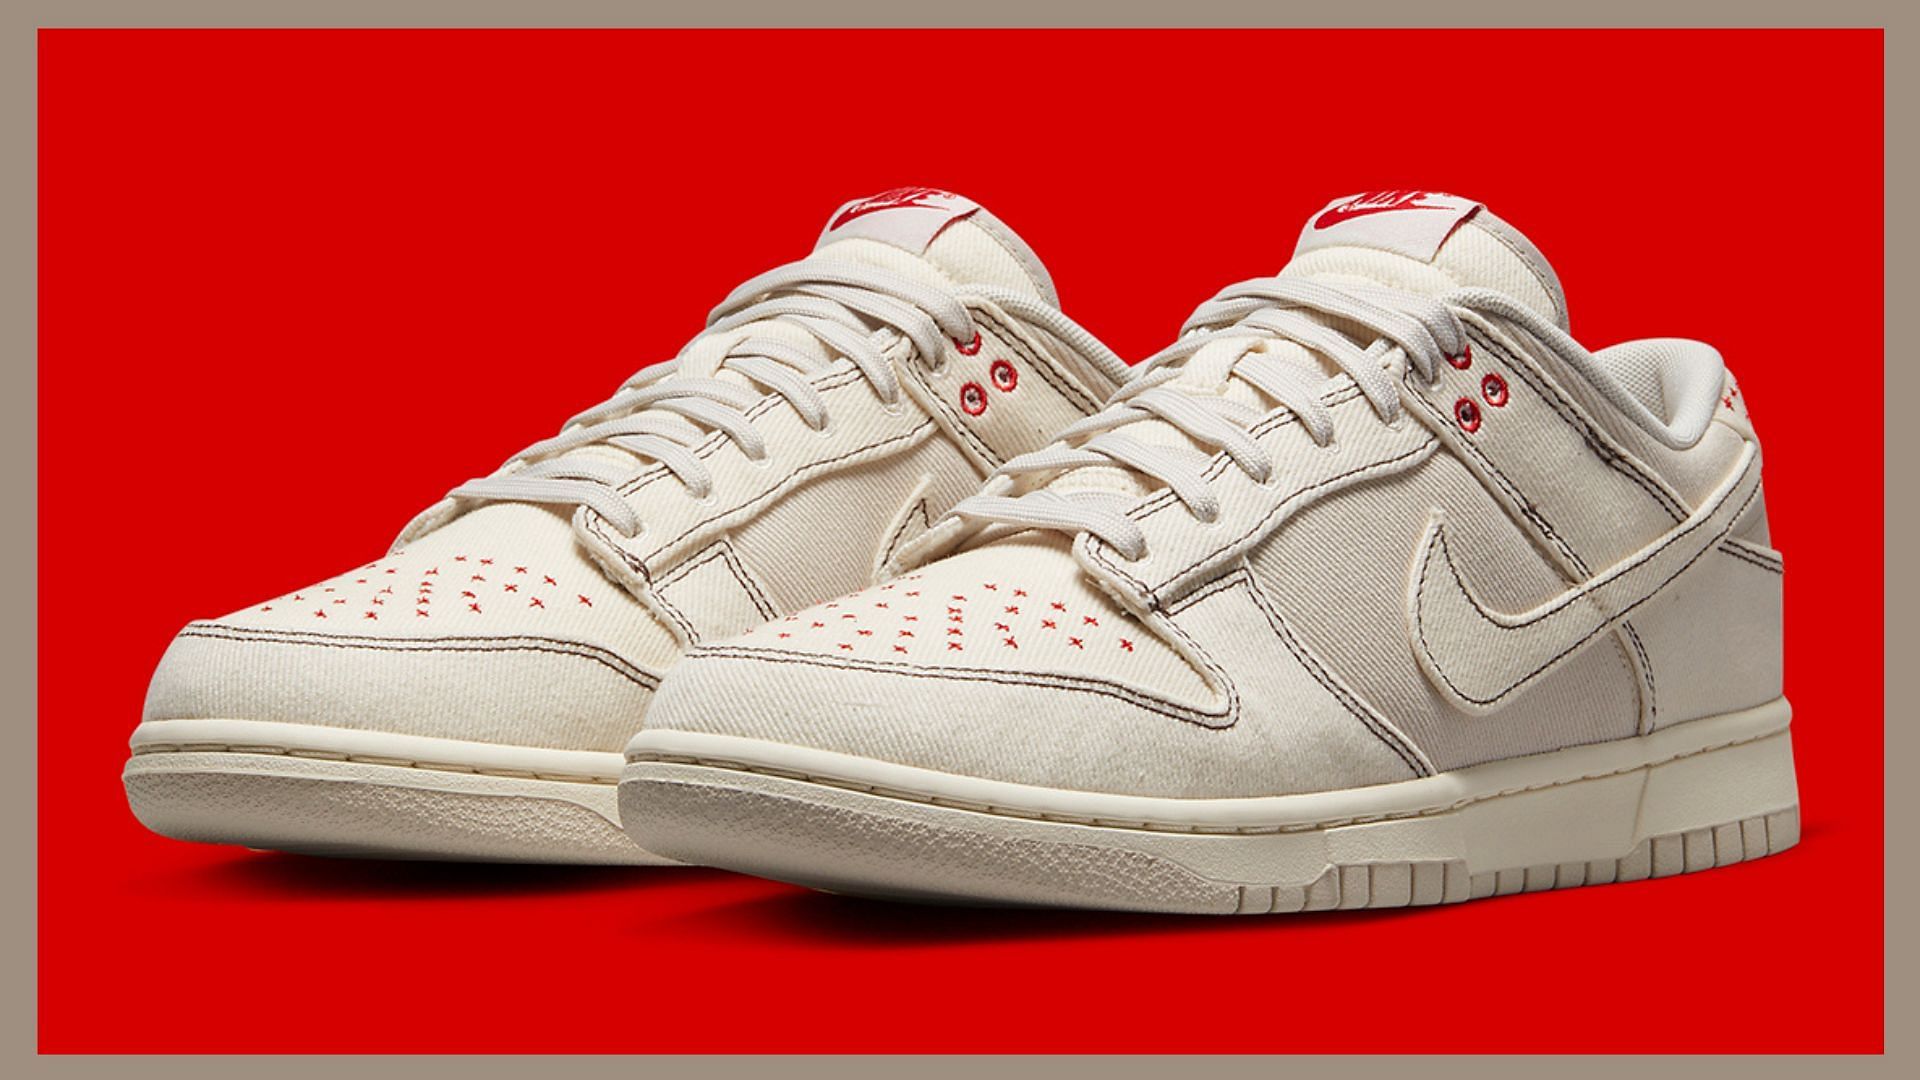 Where dunks sneakers to buy Nike Dunk Low “Light Orewood Brown” shoes? Price and